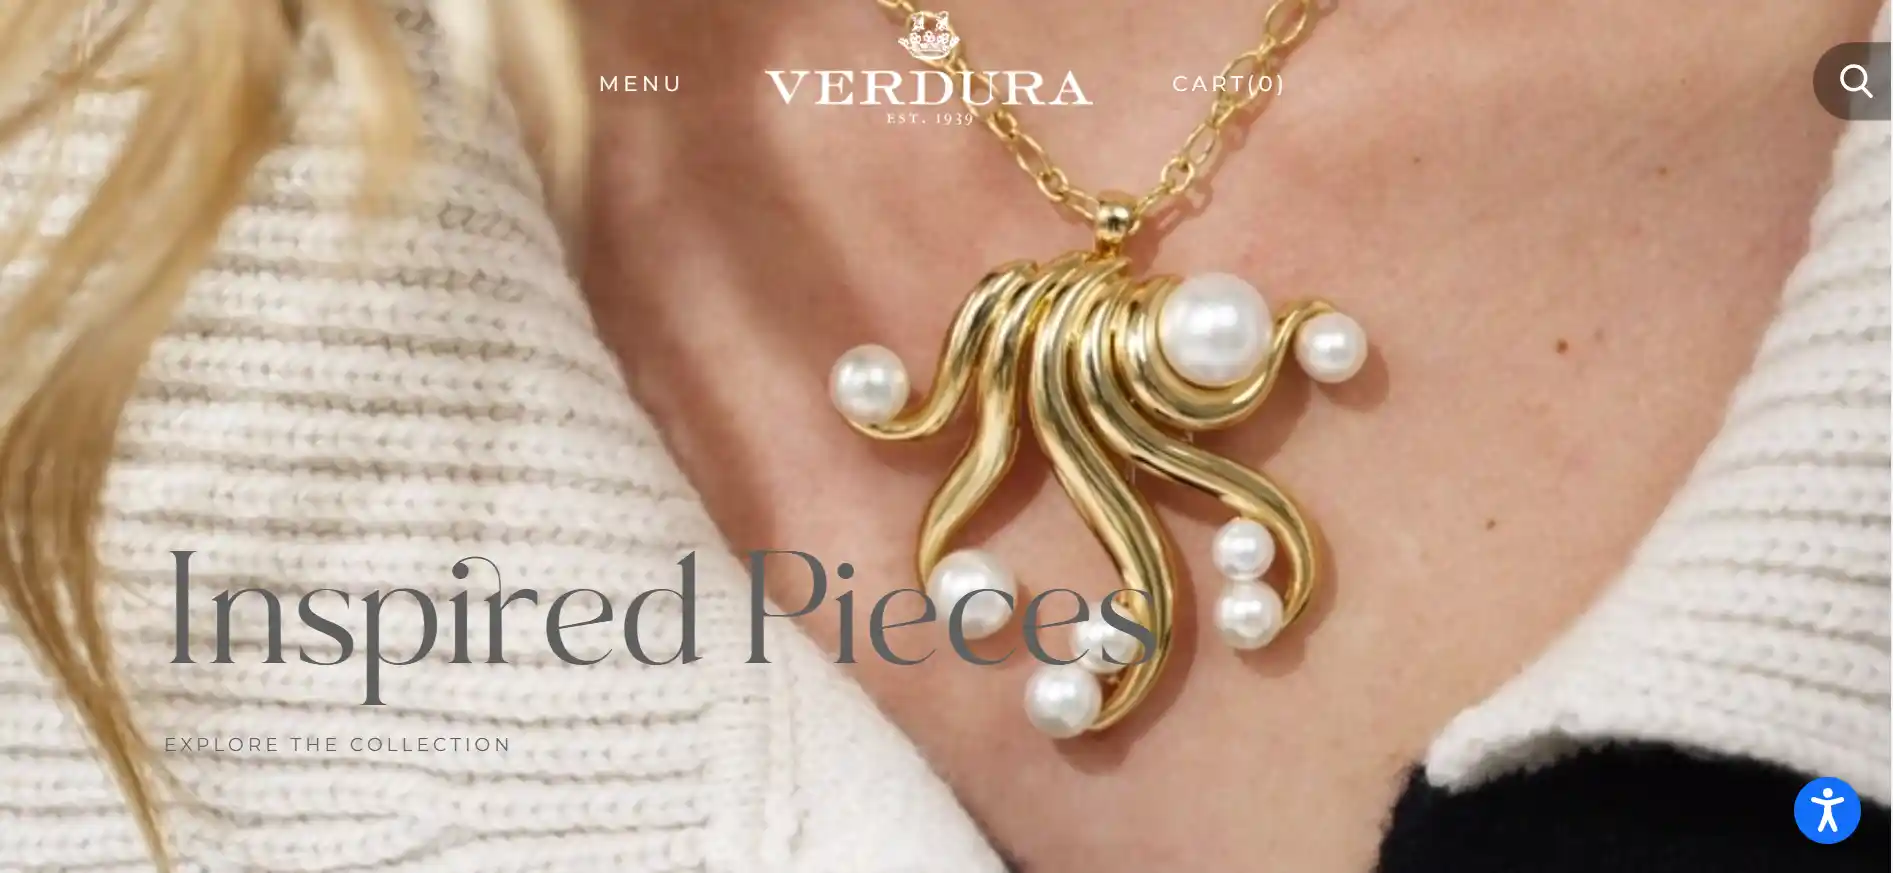 You are currently viewing Verdura Jewelry Reviews: Is It Legit Or Scam? Unveiling The Truth